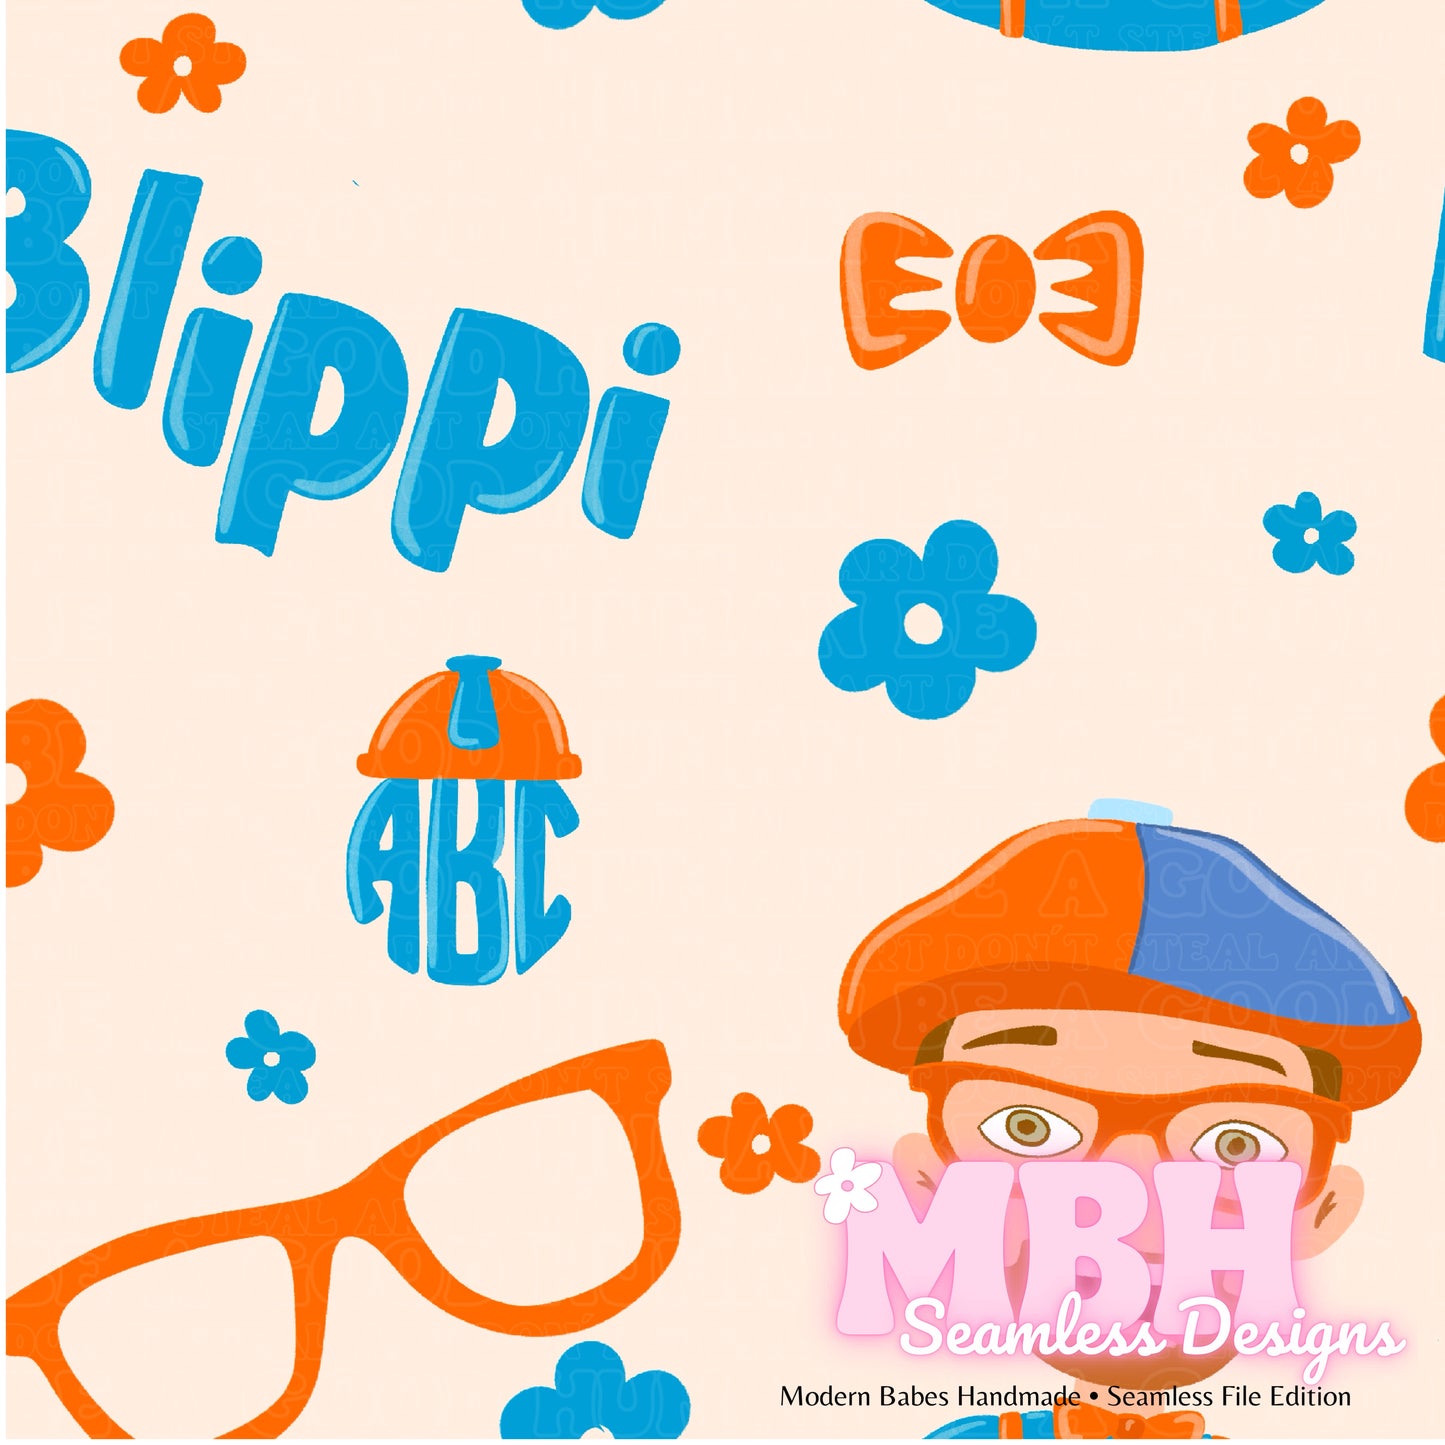 Floral Blippi Seamless Pattern MULTIPLE COLORWAYS